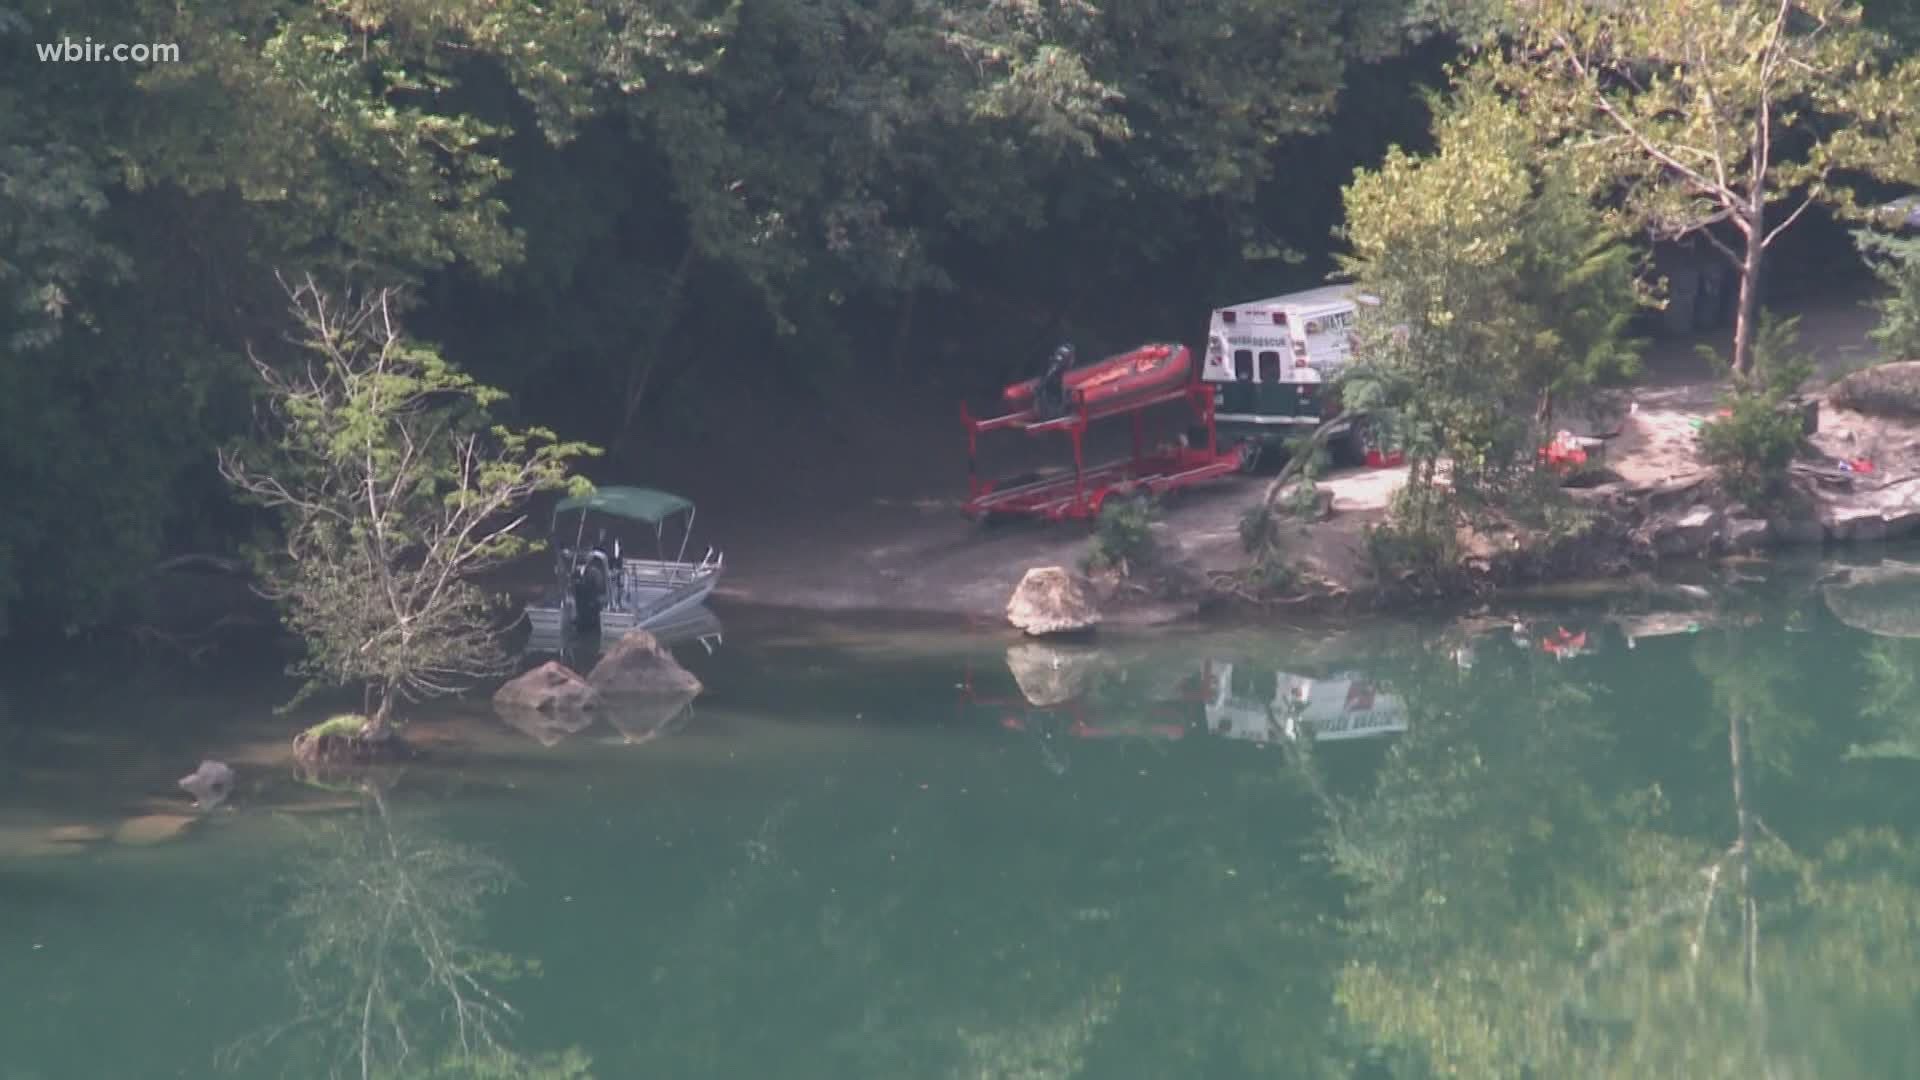 Knoxville police say search teams recovered the body of a swimmer from Fort Dickerson Quarry in south Knoxville around 9:45 this morning.